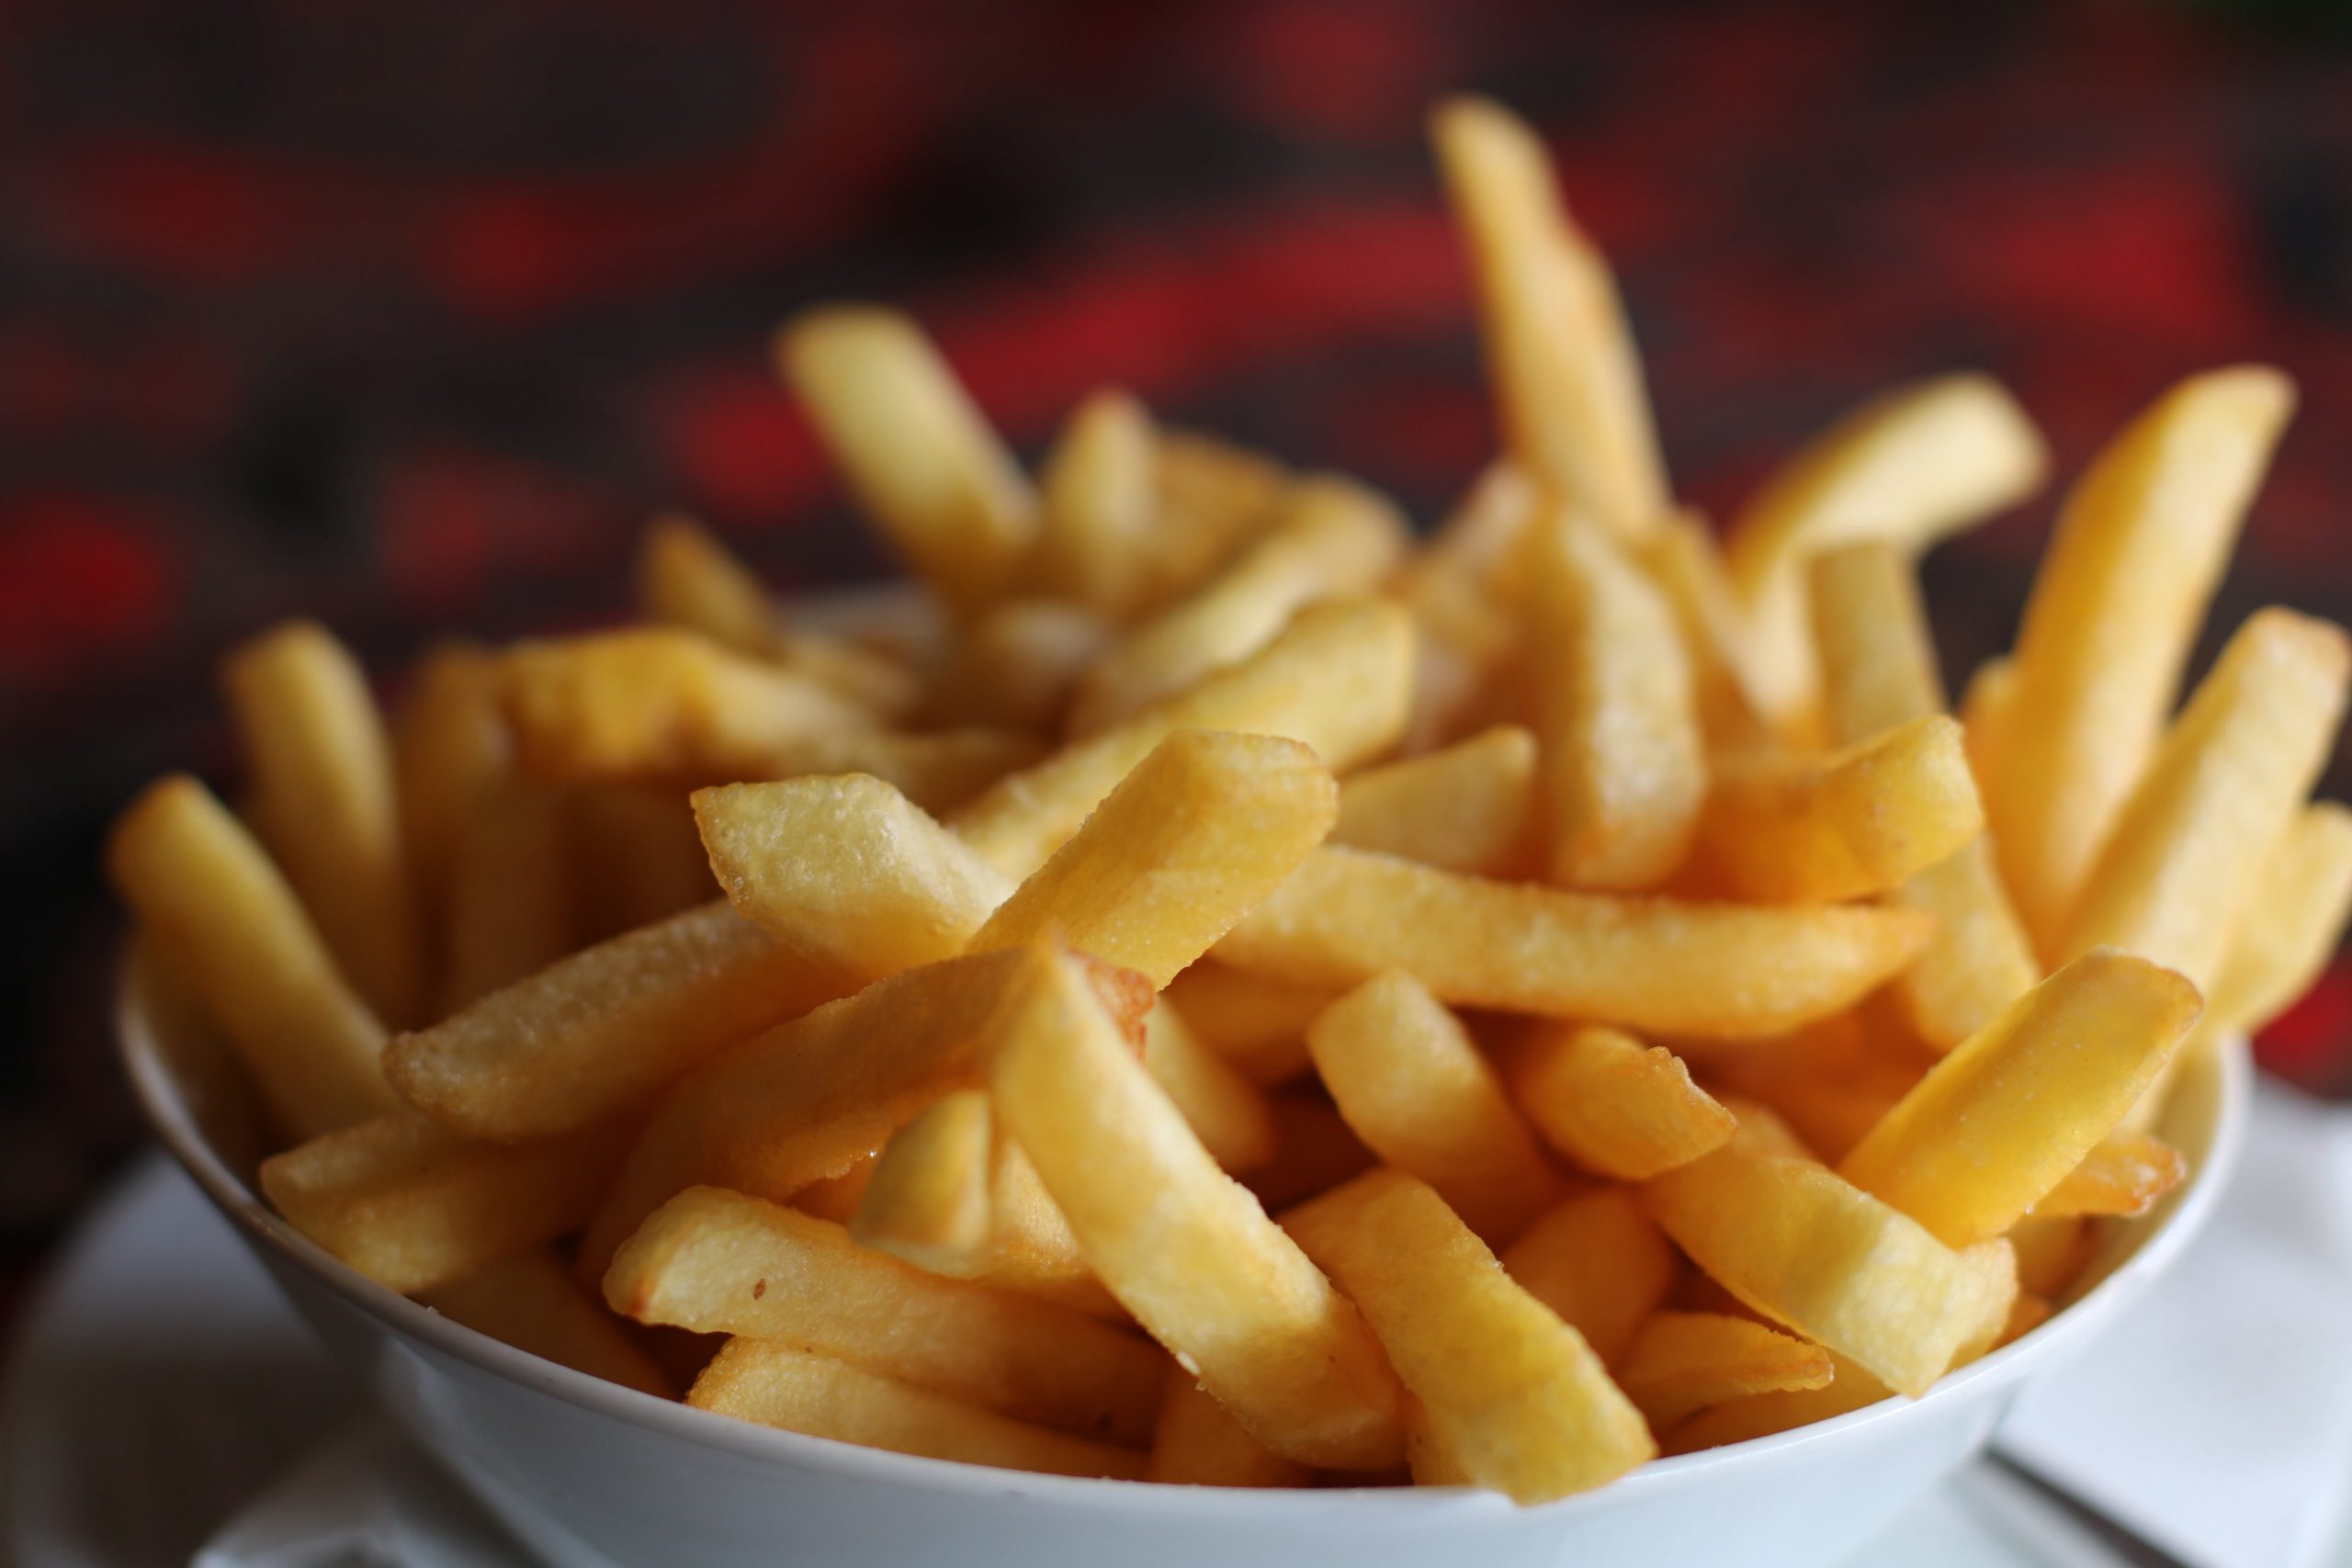 Close up of french fries in a white bowl.